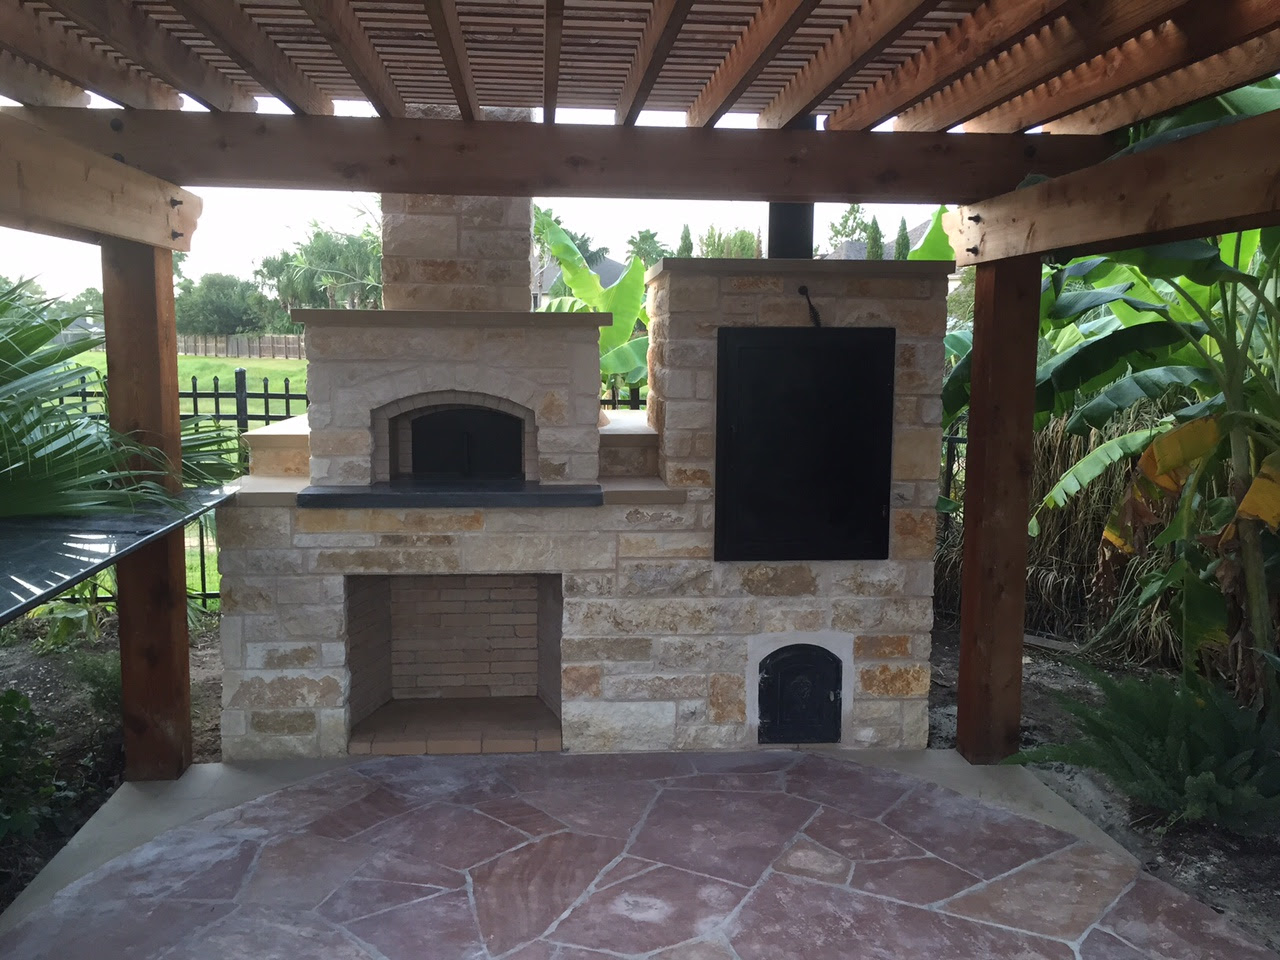 The oven becomes a permanent feature of the backyard, a focal point for gatherings, and a diy that saves you potentially thousands of dollars. Texas Oven Co Do You Need An Oven Door